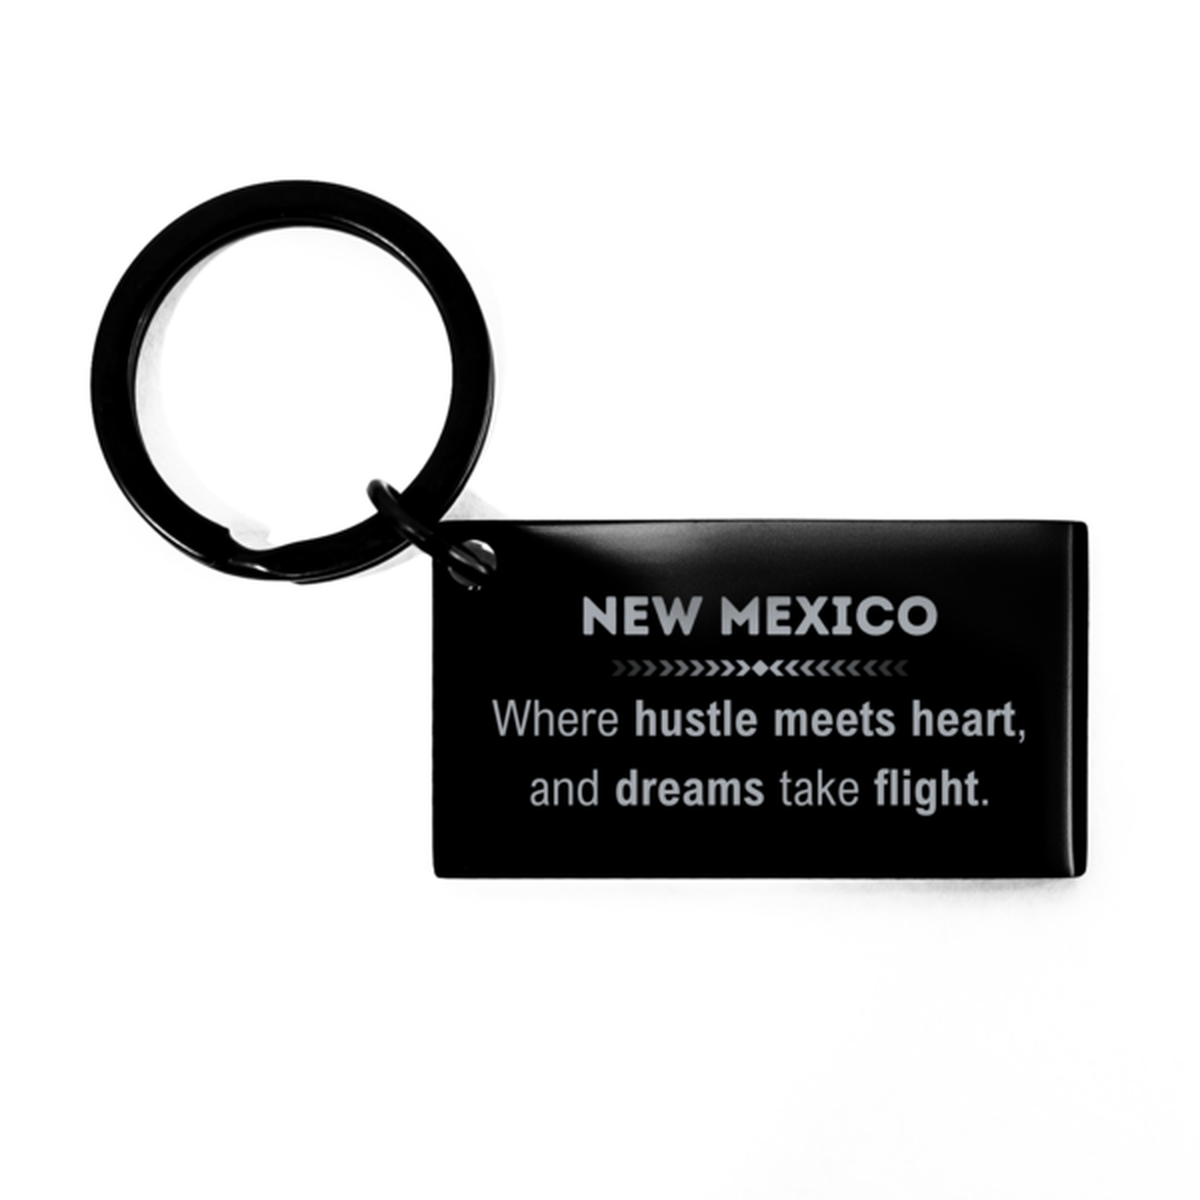 New Mexico: Where hustle meets heart, and dreams take flight, New Mexico Gifts, Proud New Mexico Christmas Birthday New Mexico Keychain, New Mexico State People, Men, Women, Friends